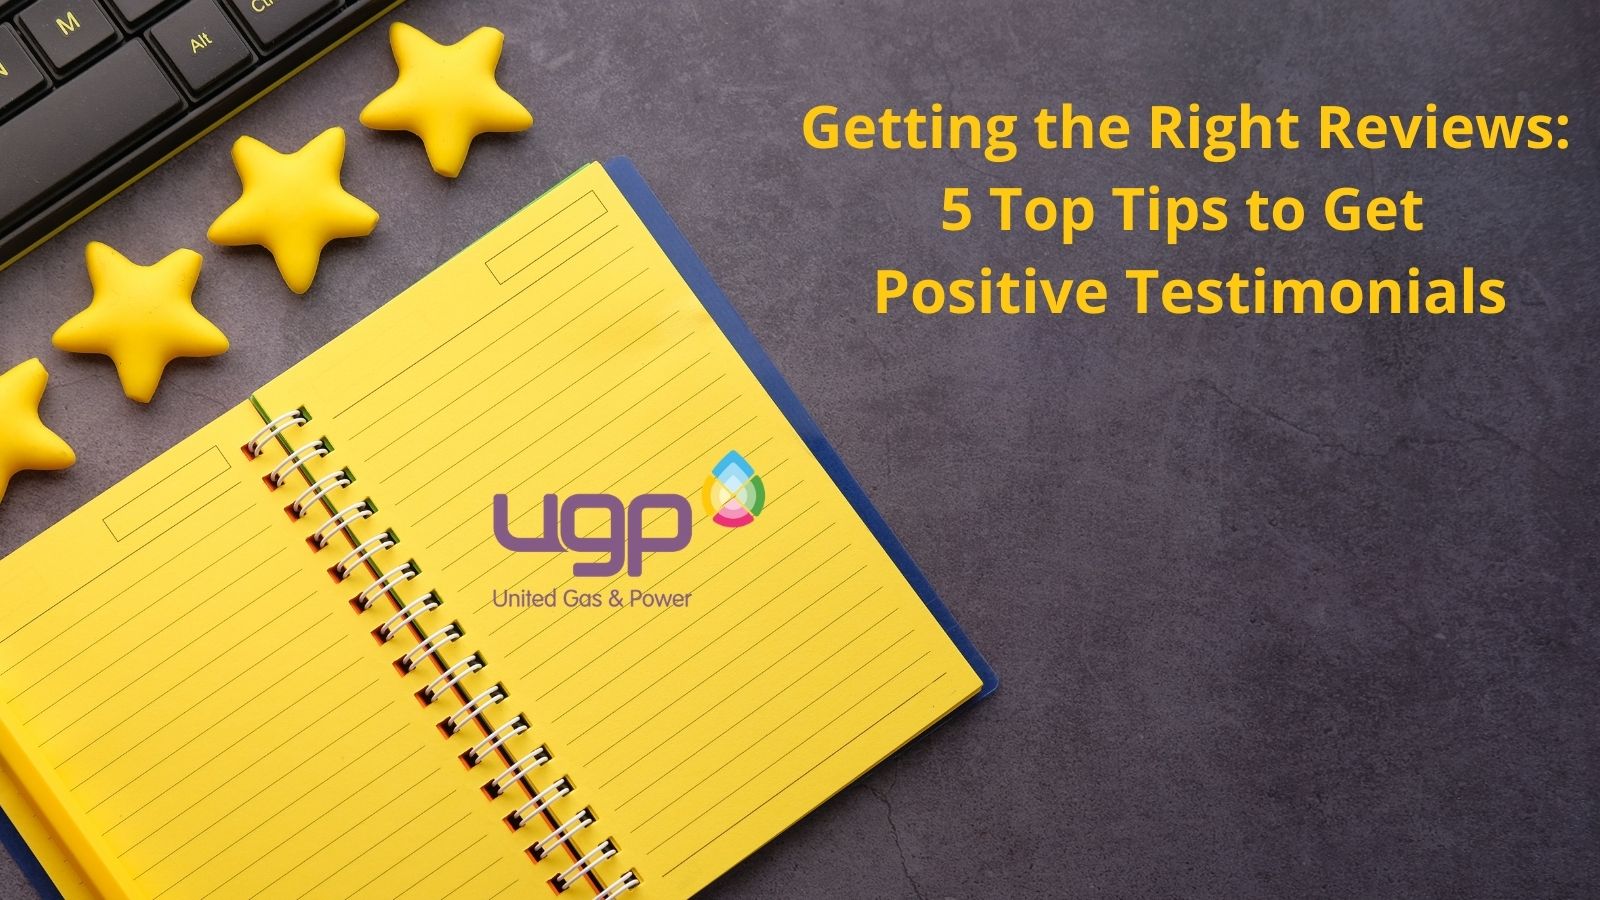 Getting the Right Reviews: 5 Tips to Get Positive Testimonials